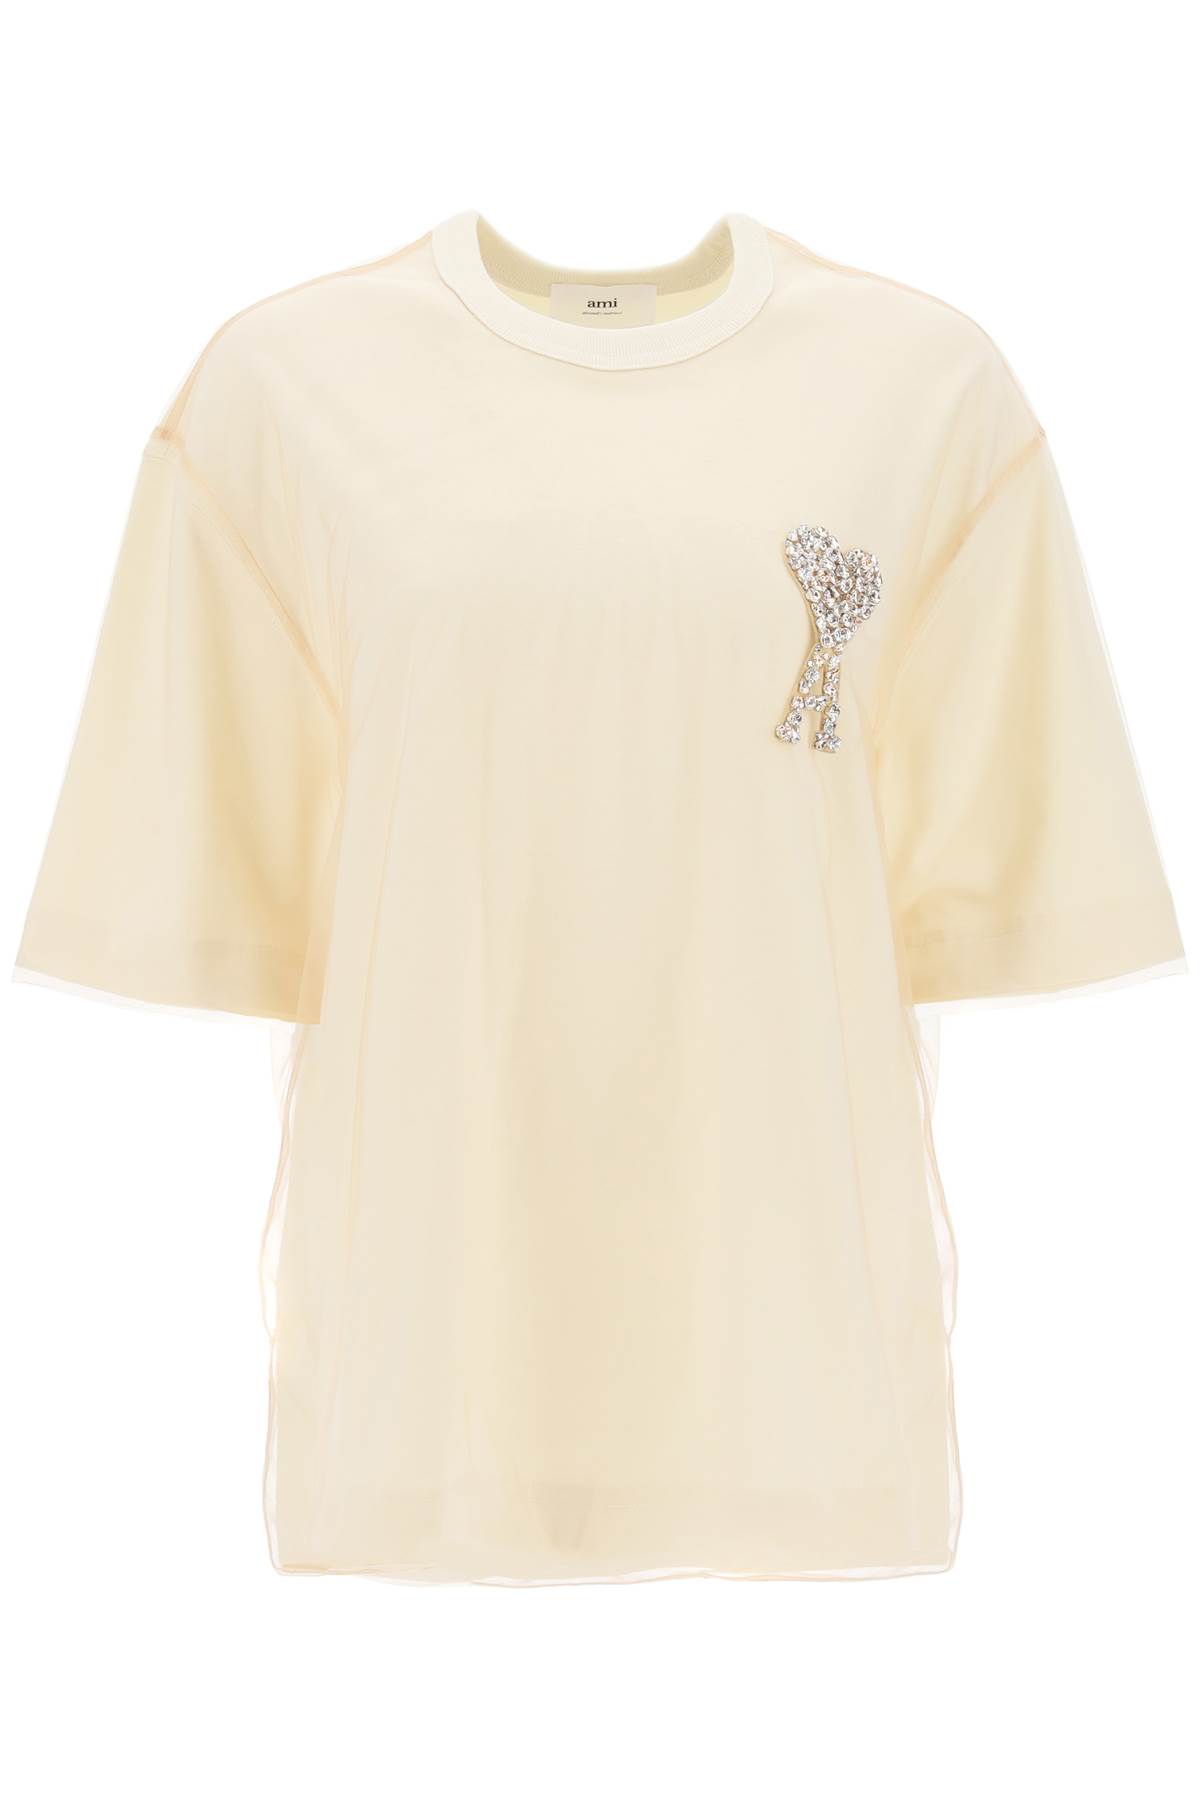 AMI ALEXANDRE MATTIUSSI JERSEY AND TULLE T-SHIRT WITH RHINESTONE-STUDDED LOGO